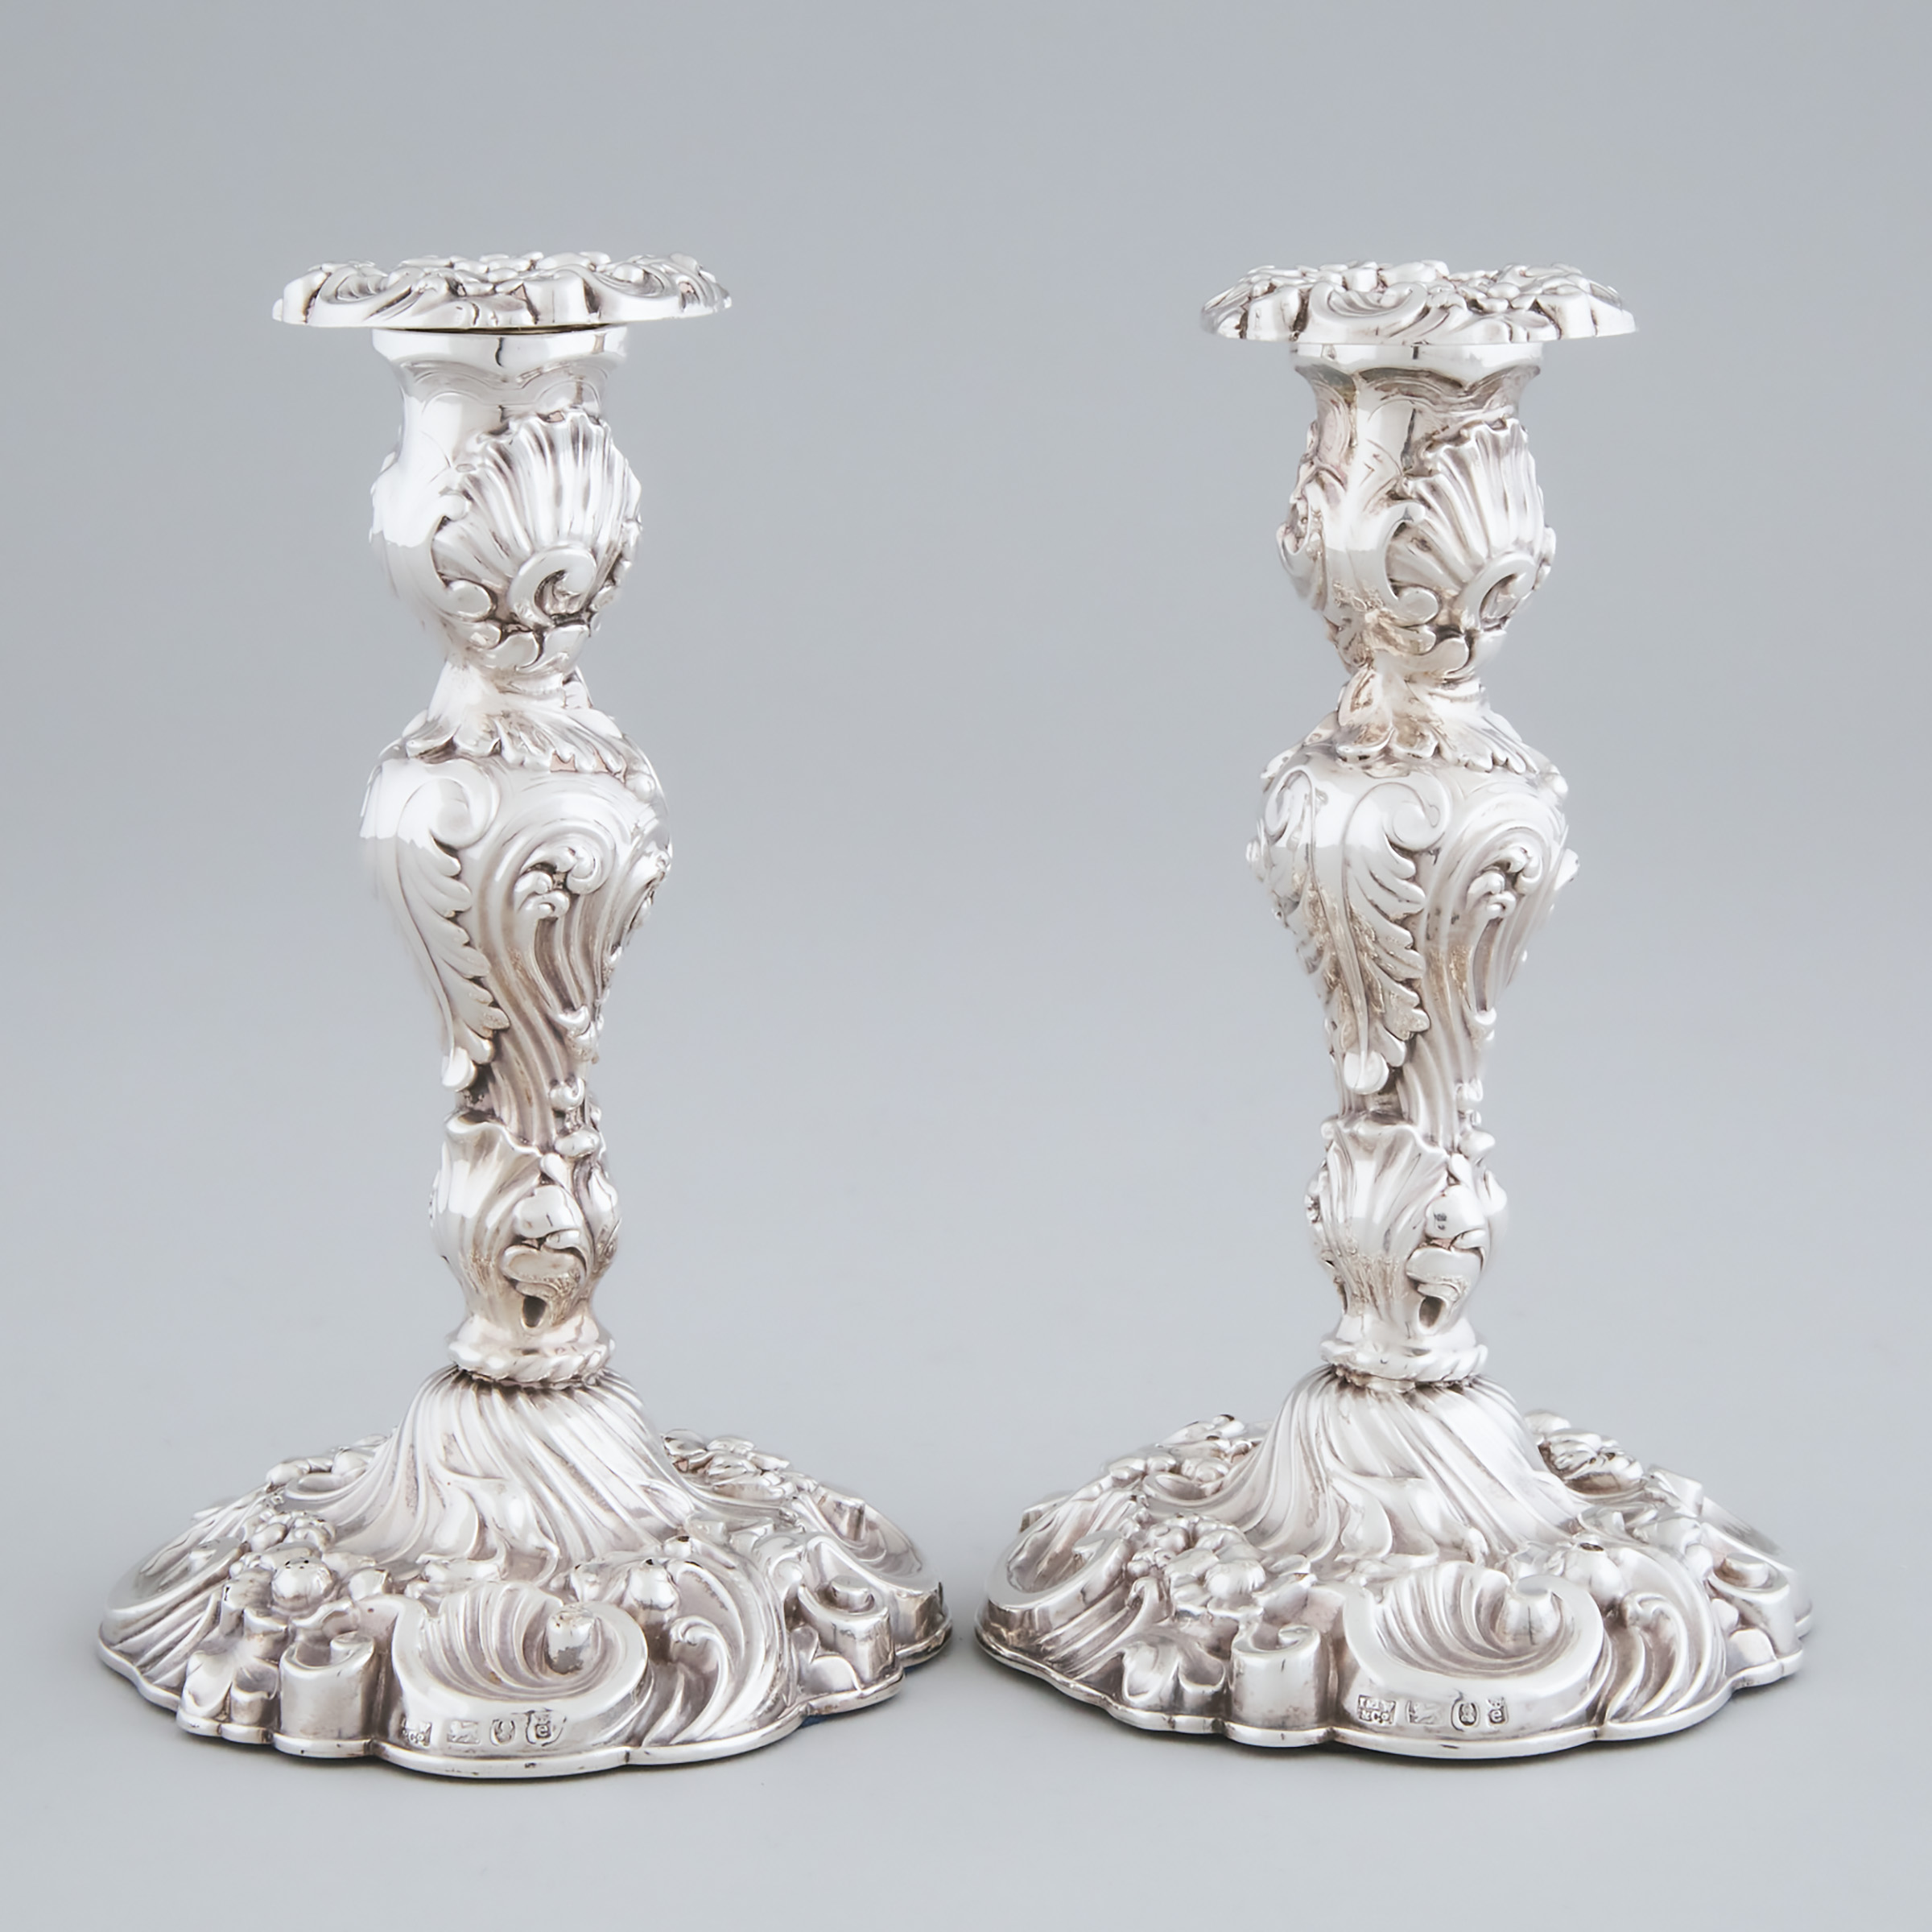 Pair of George IV Silver Candlesticks,